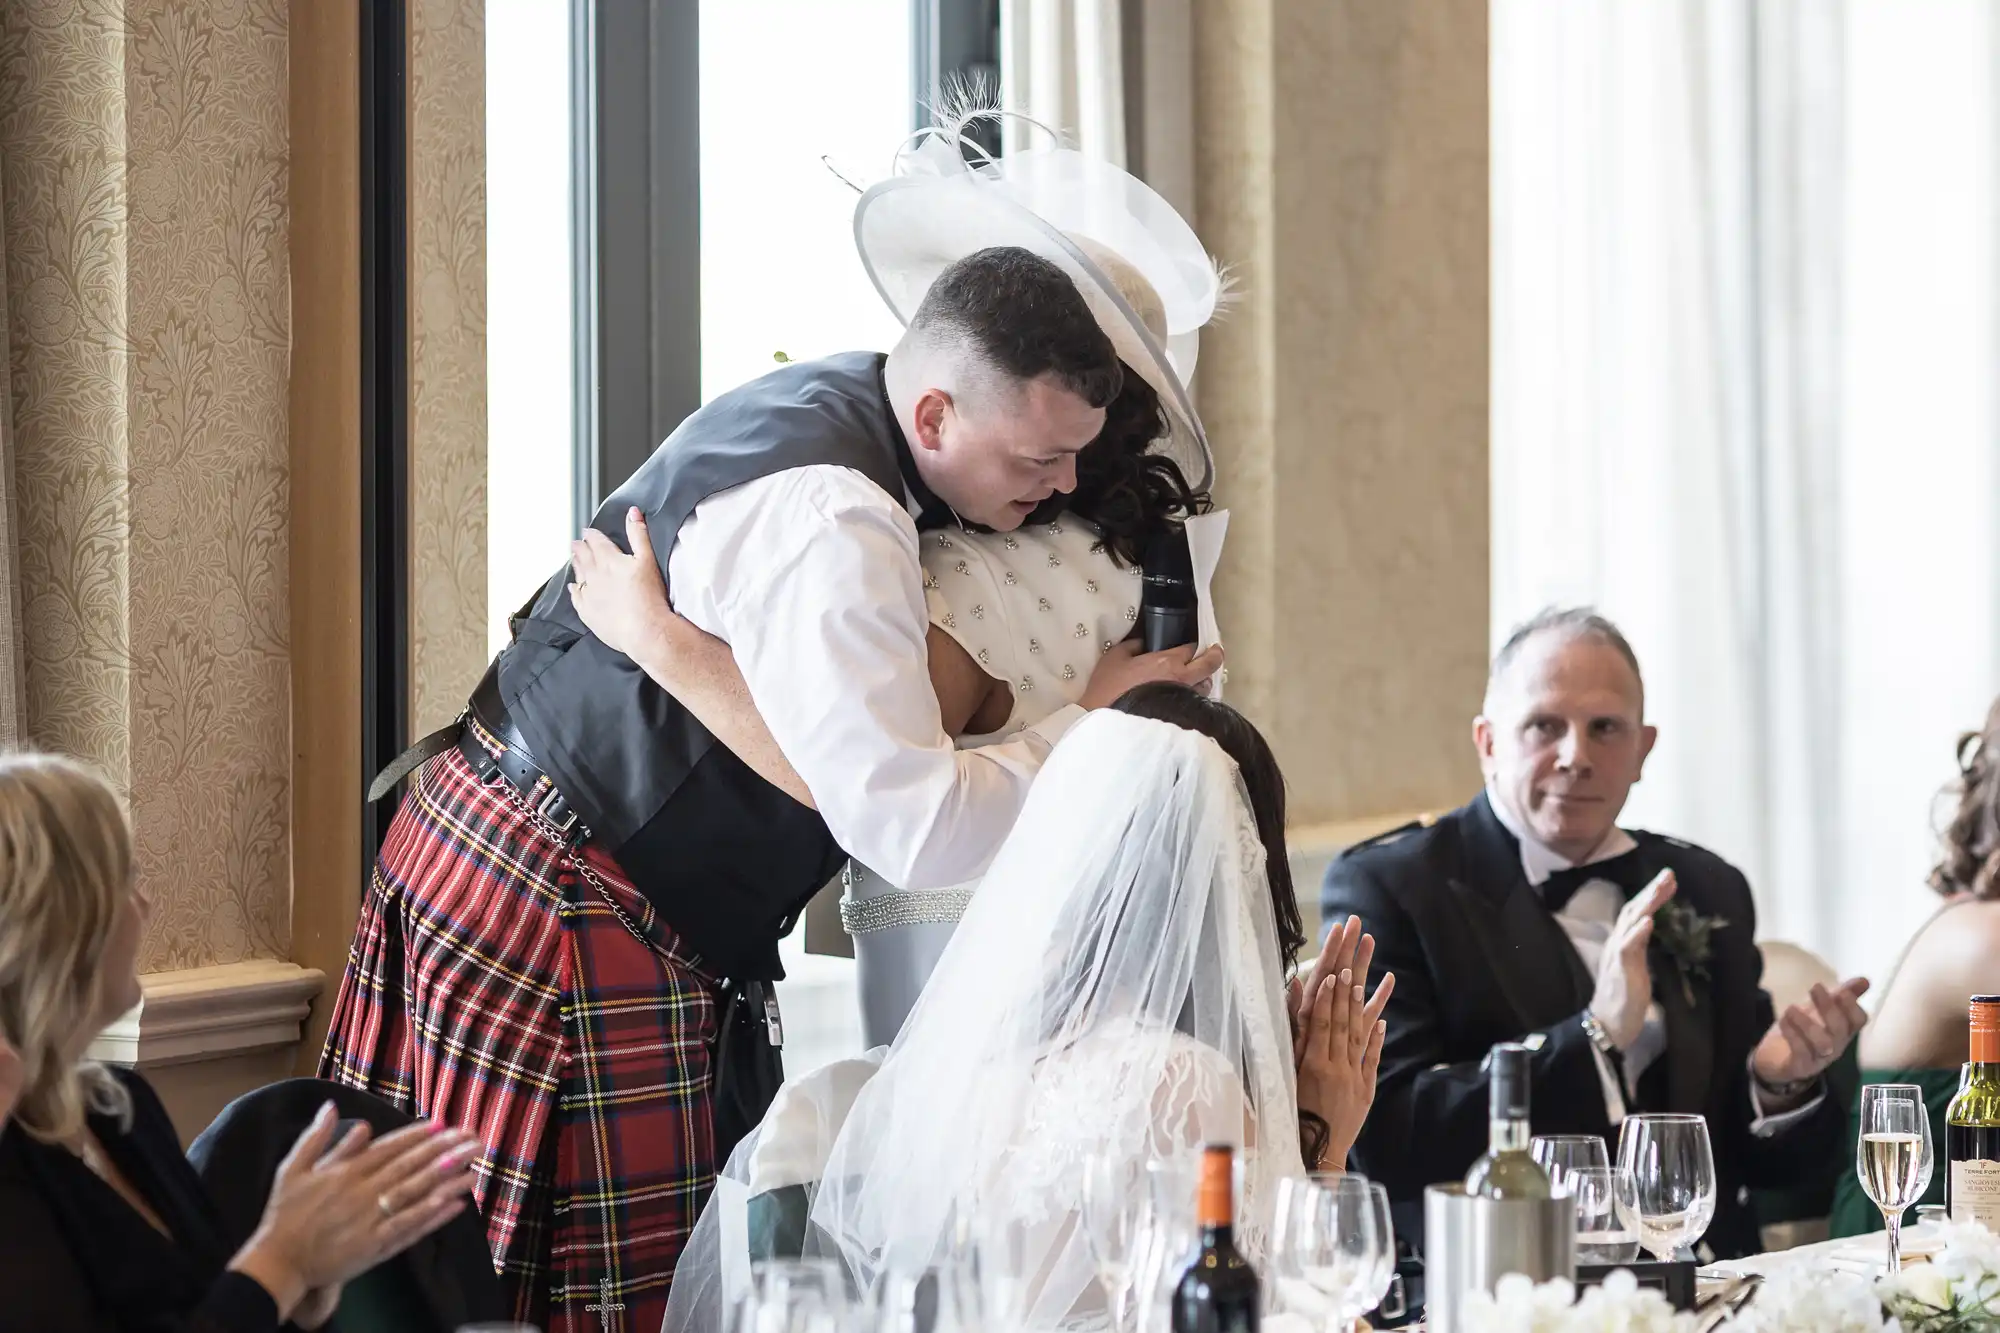 A groom in a kilt hugs a wedding guest while the bride, seated, watches; applause from other guests surrounds them in an elegant room.